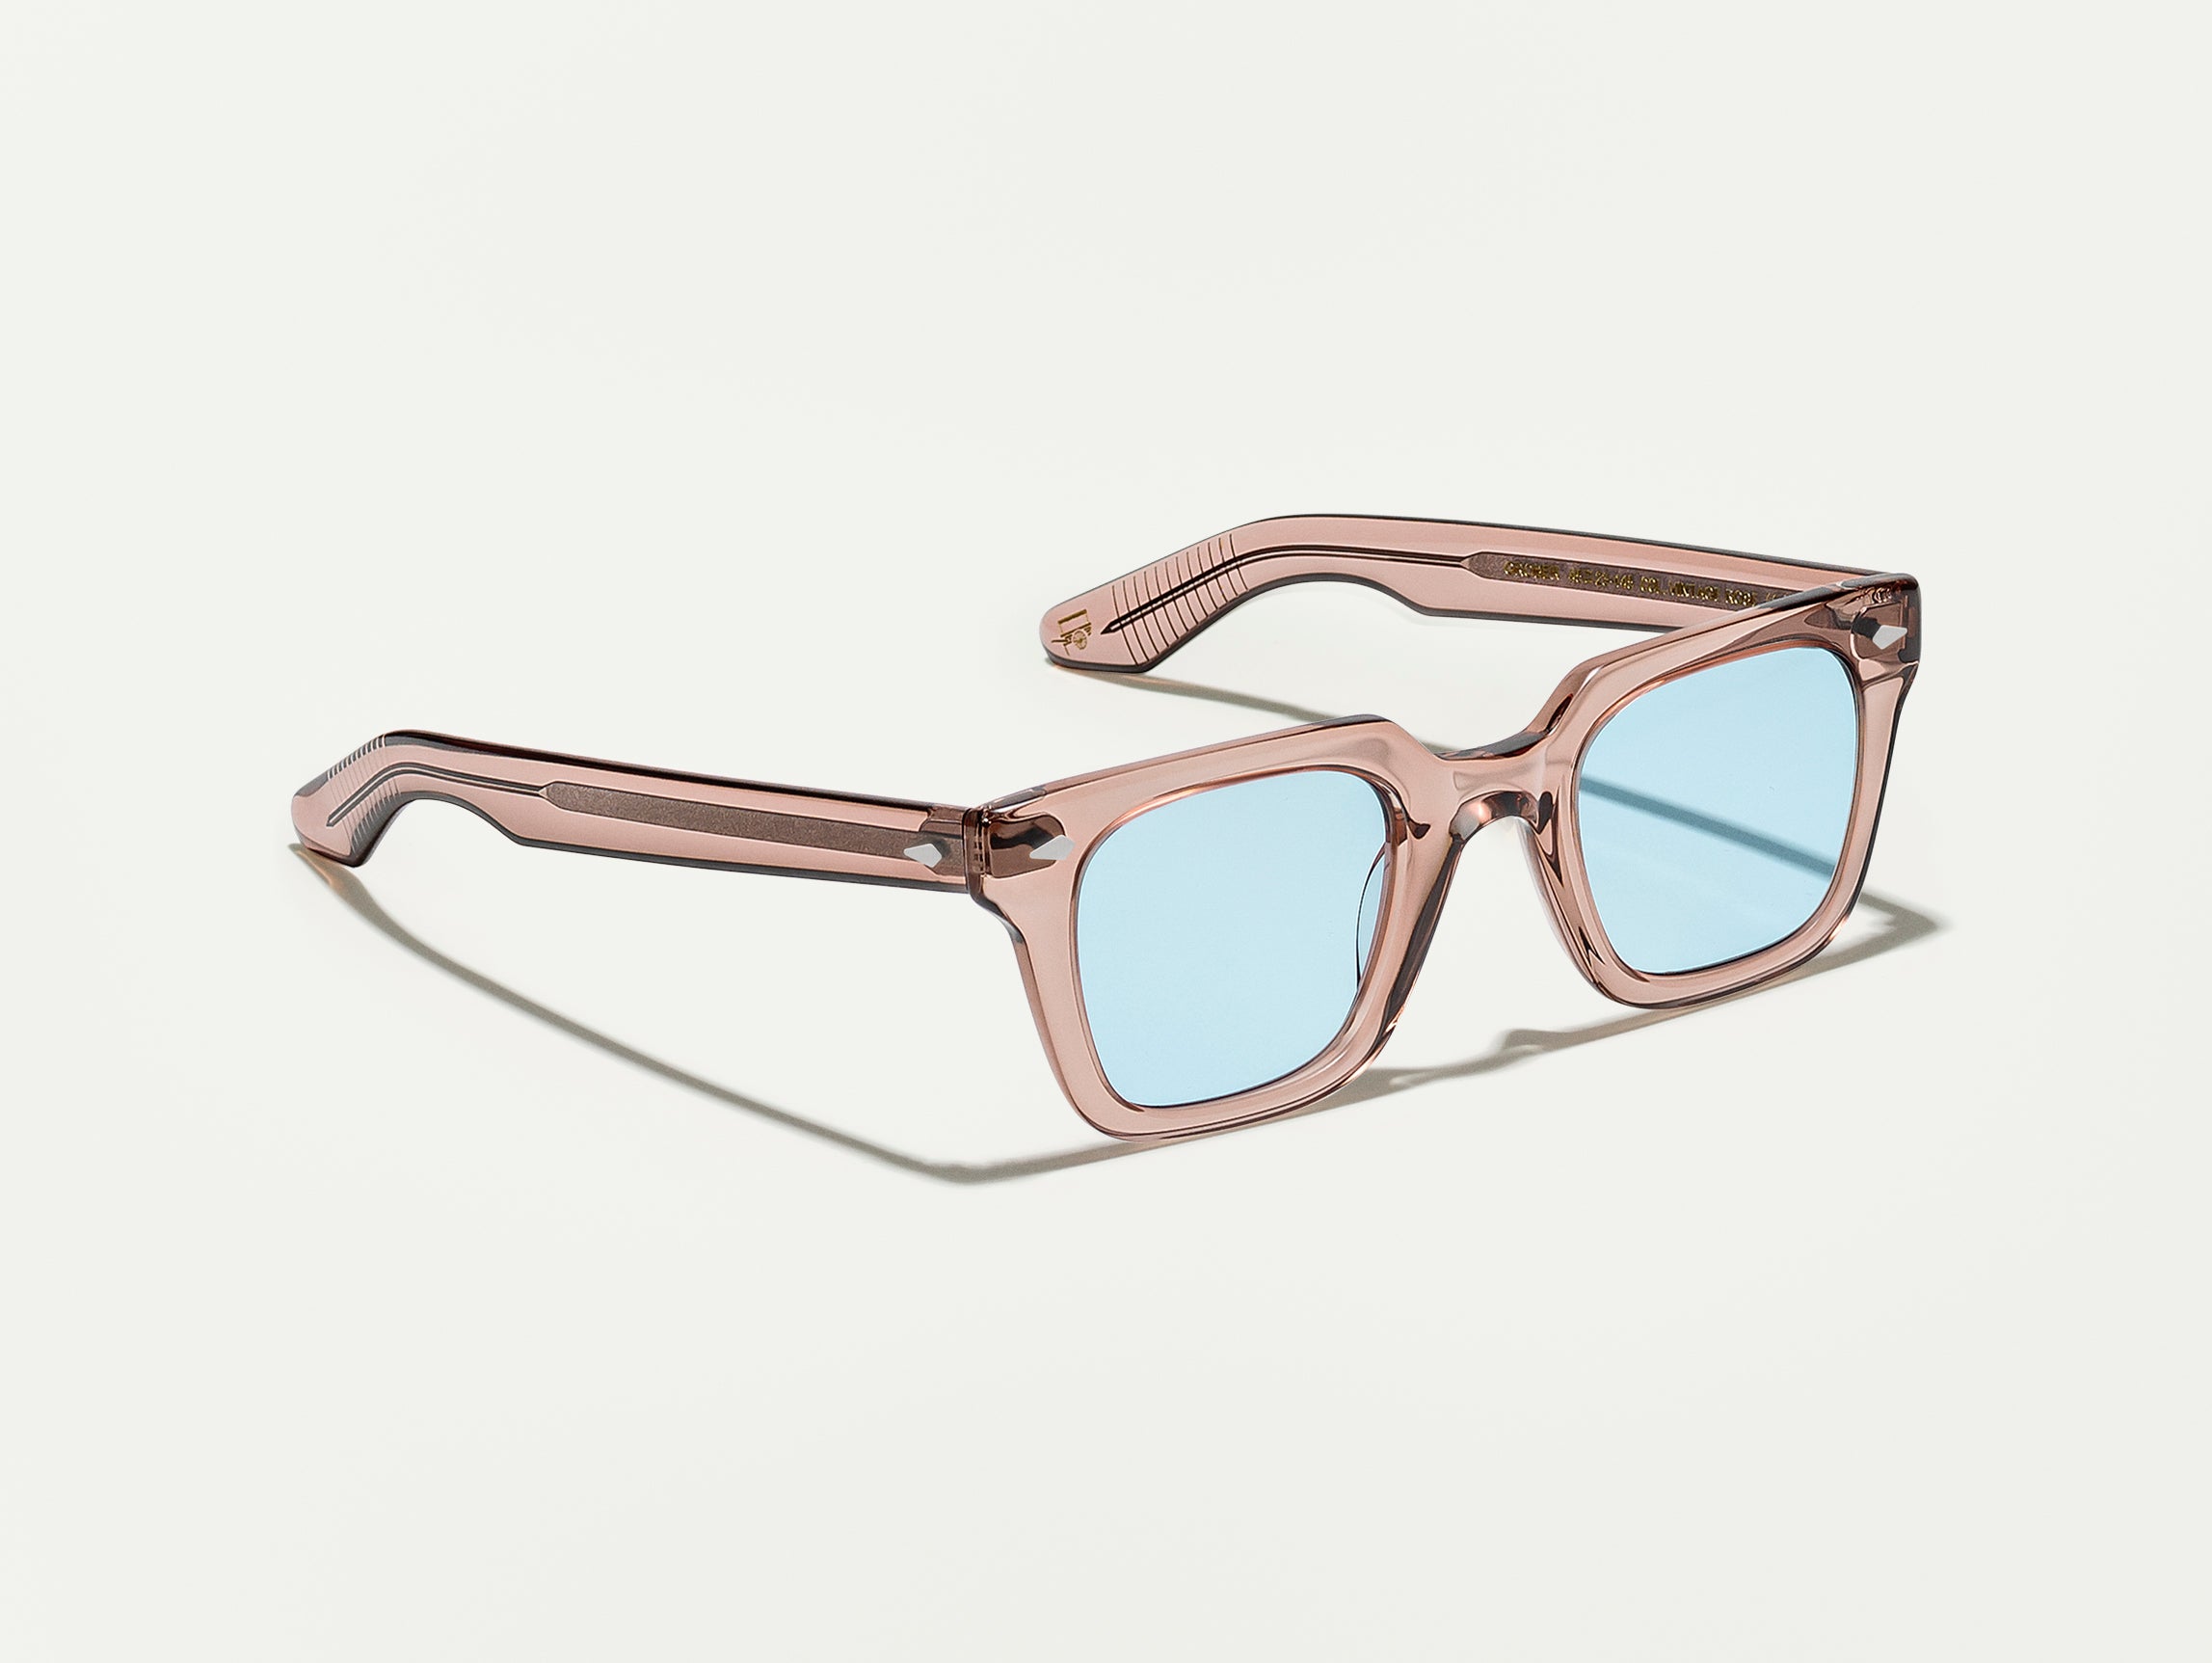 The GROBER SUN in Vintage Rose with Bel Air Blue Tinted Lenses